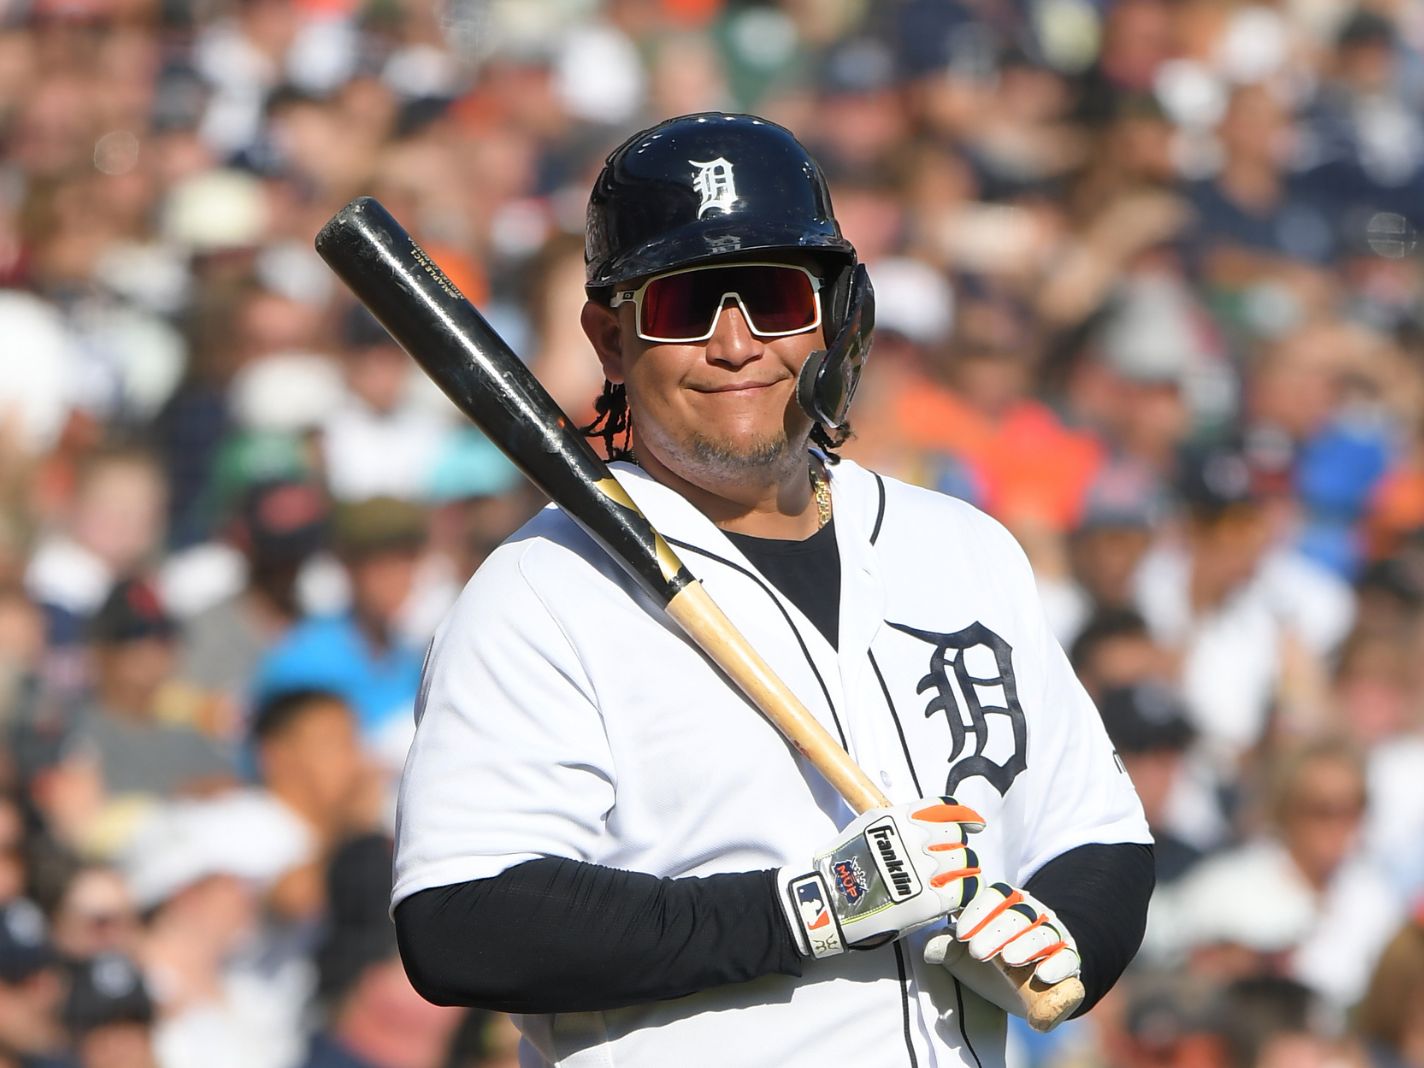 How to watch Miguel Cabrera play final game in MLB for Detroit Tigers